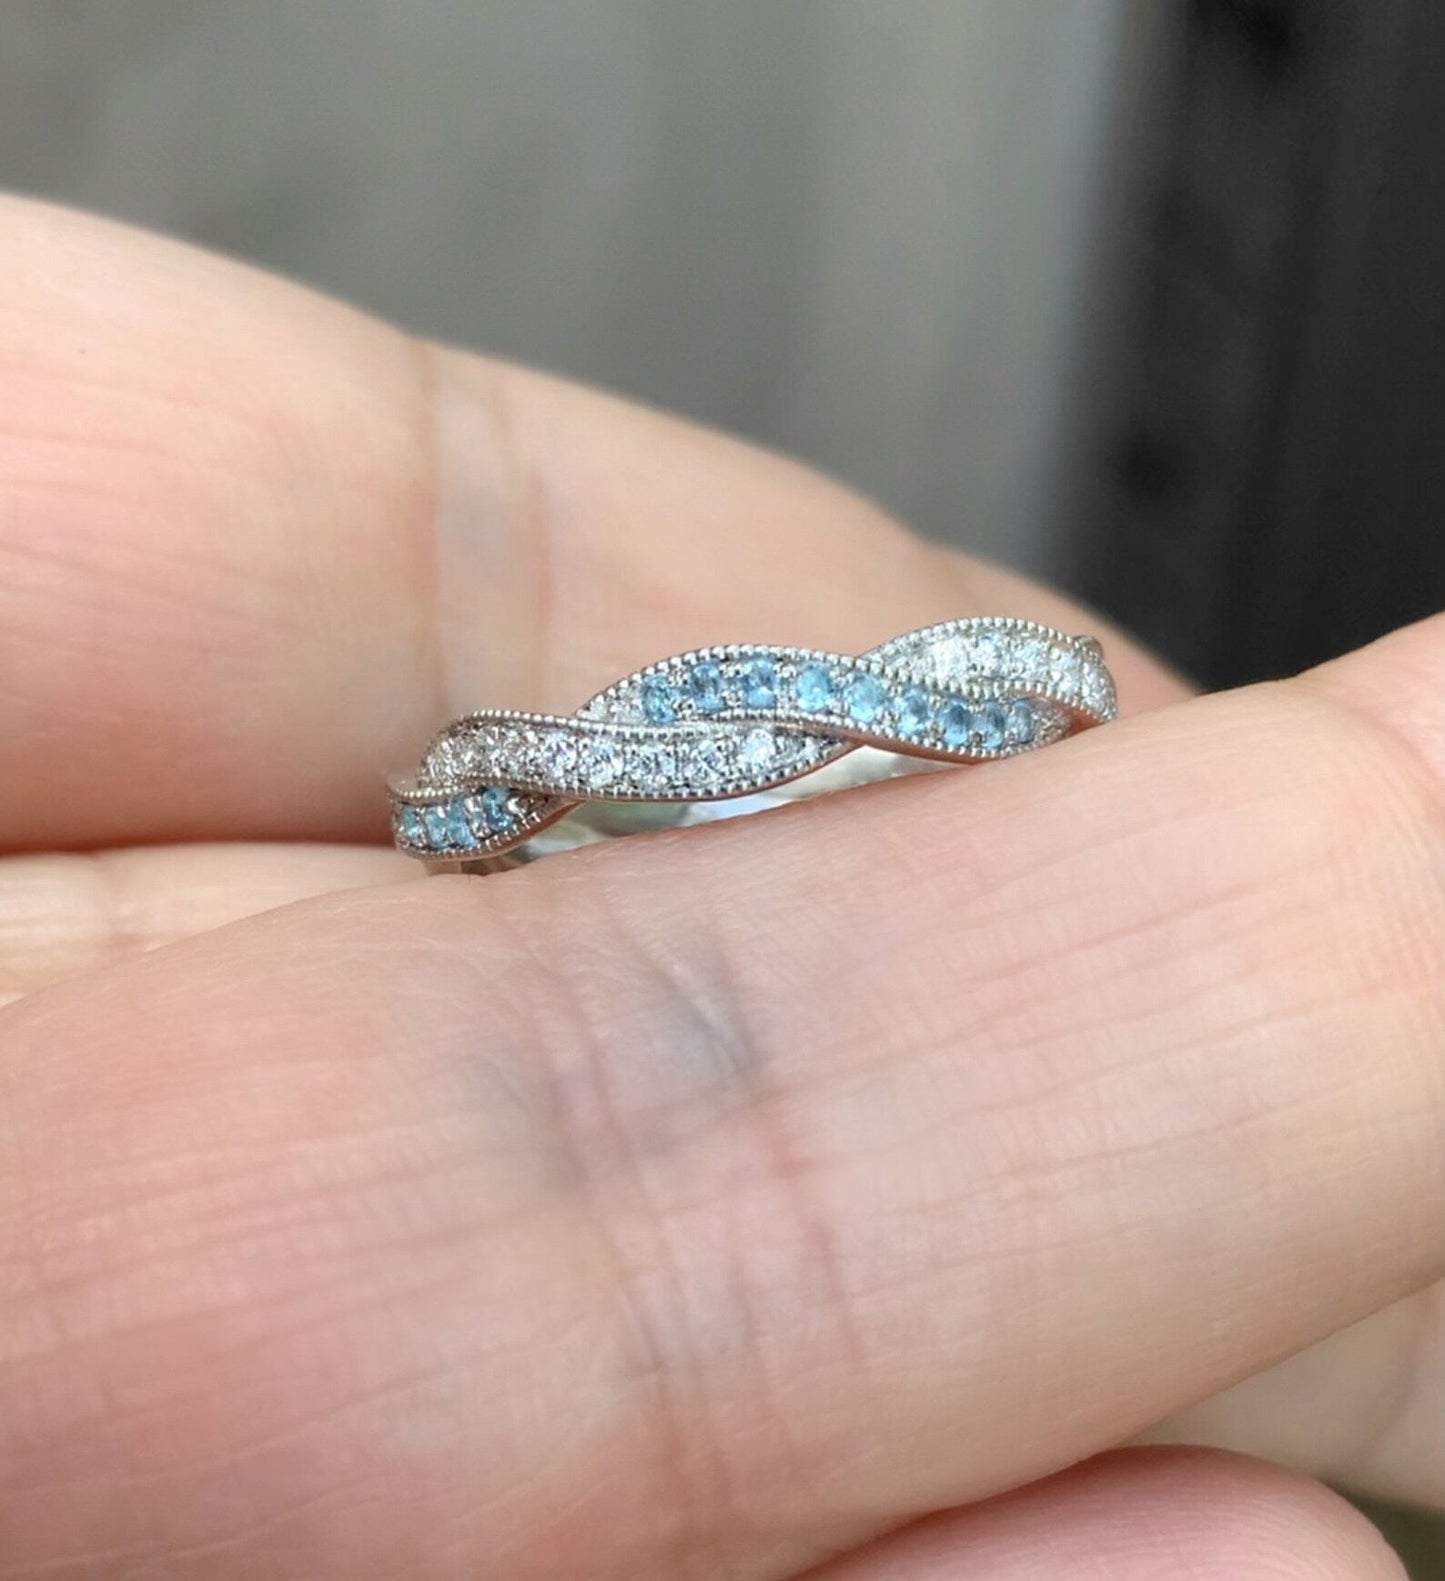 Reserved for Giovana/ Upgrade to 6mm Twisted Band with Natural Diamonds and Aquamarines